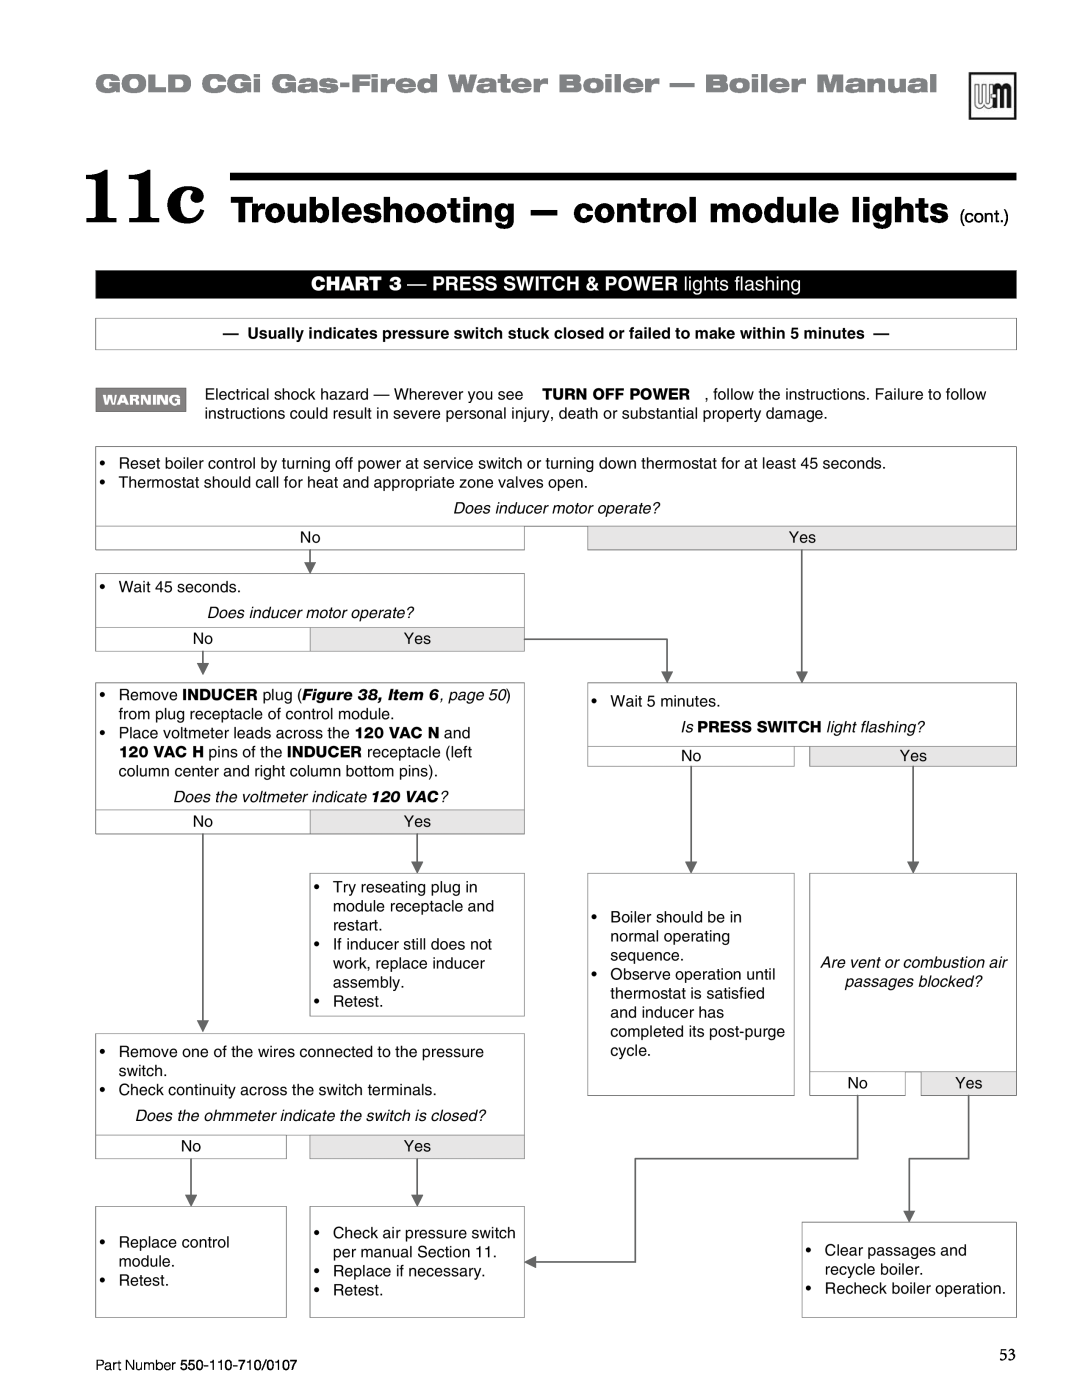 Weil-McLain 550-110-710/0107 manual 11c Troubleshooting — control module lights cont, Does inducer motor operate? 